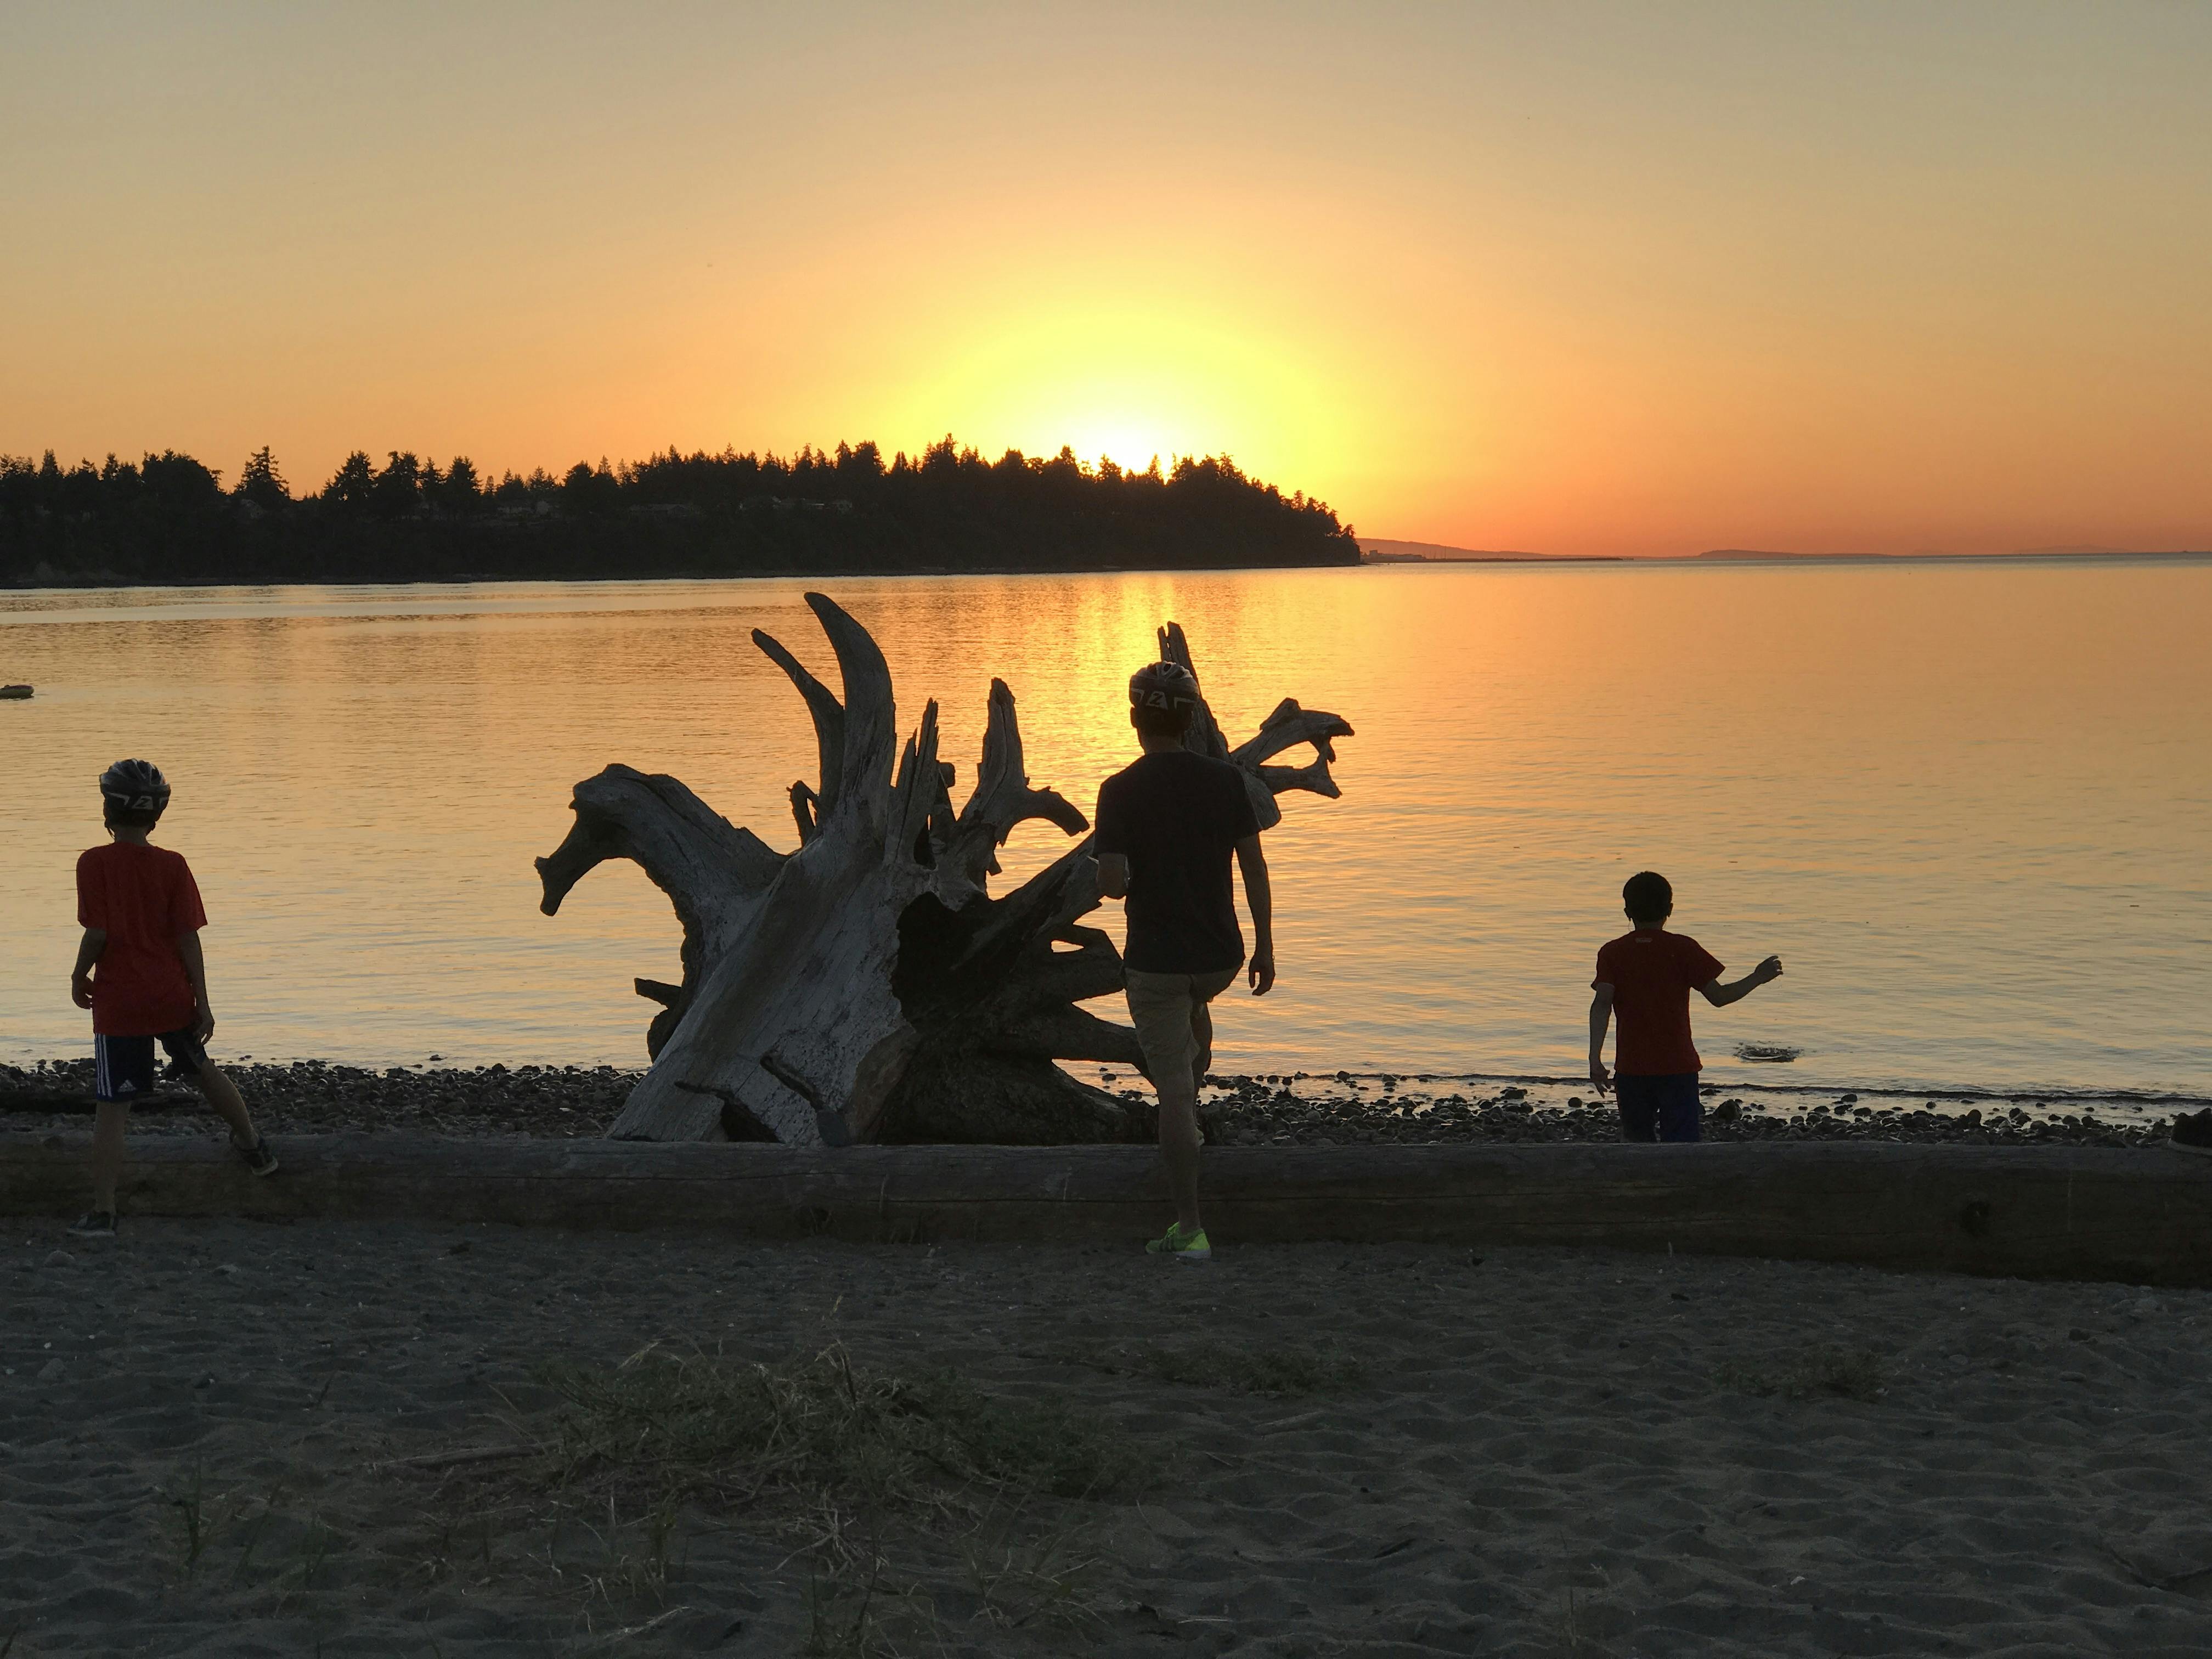 Parksville Bay at sunset